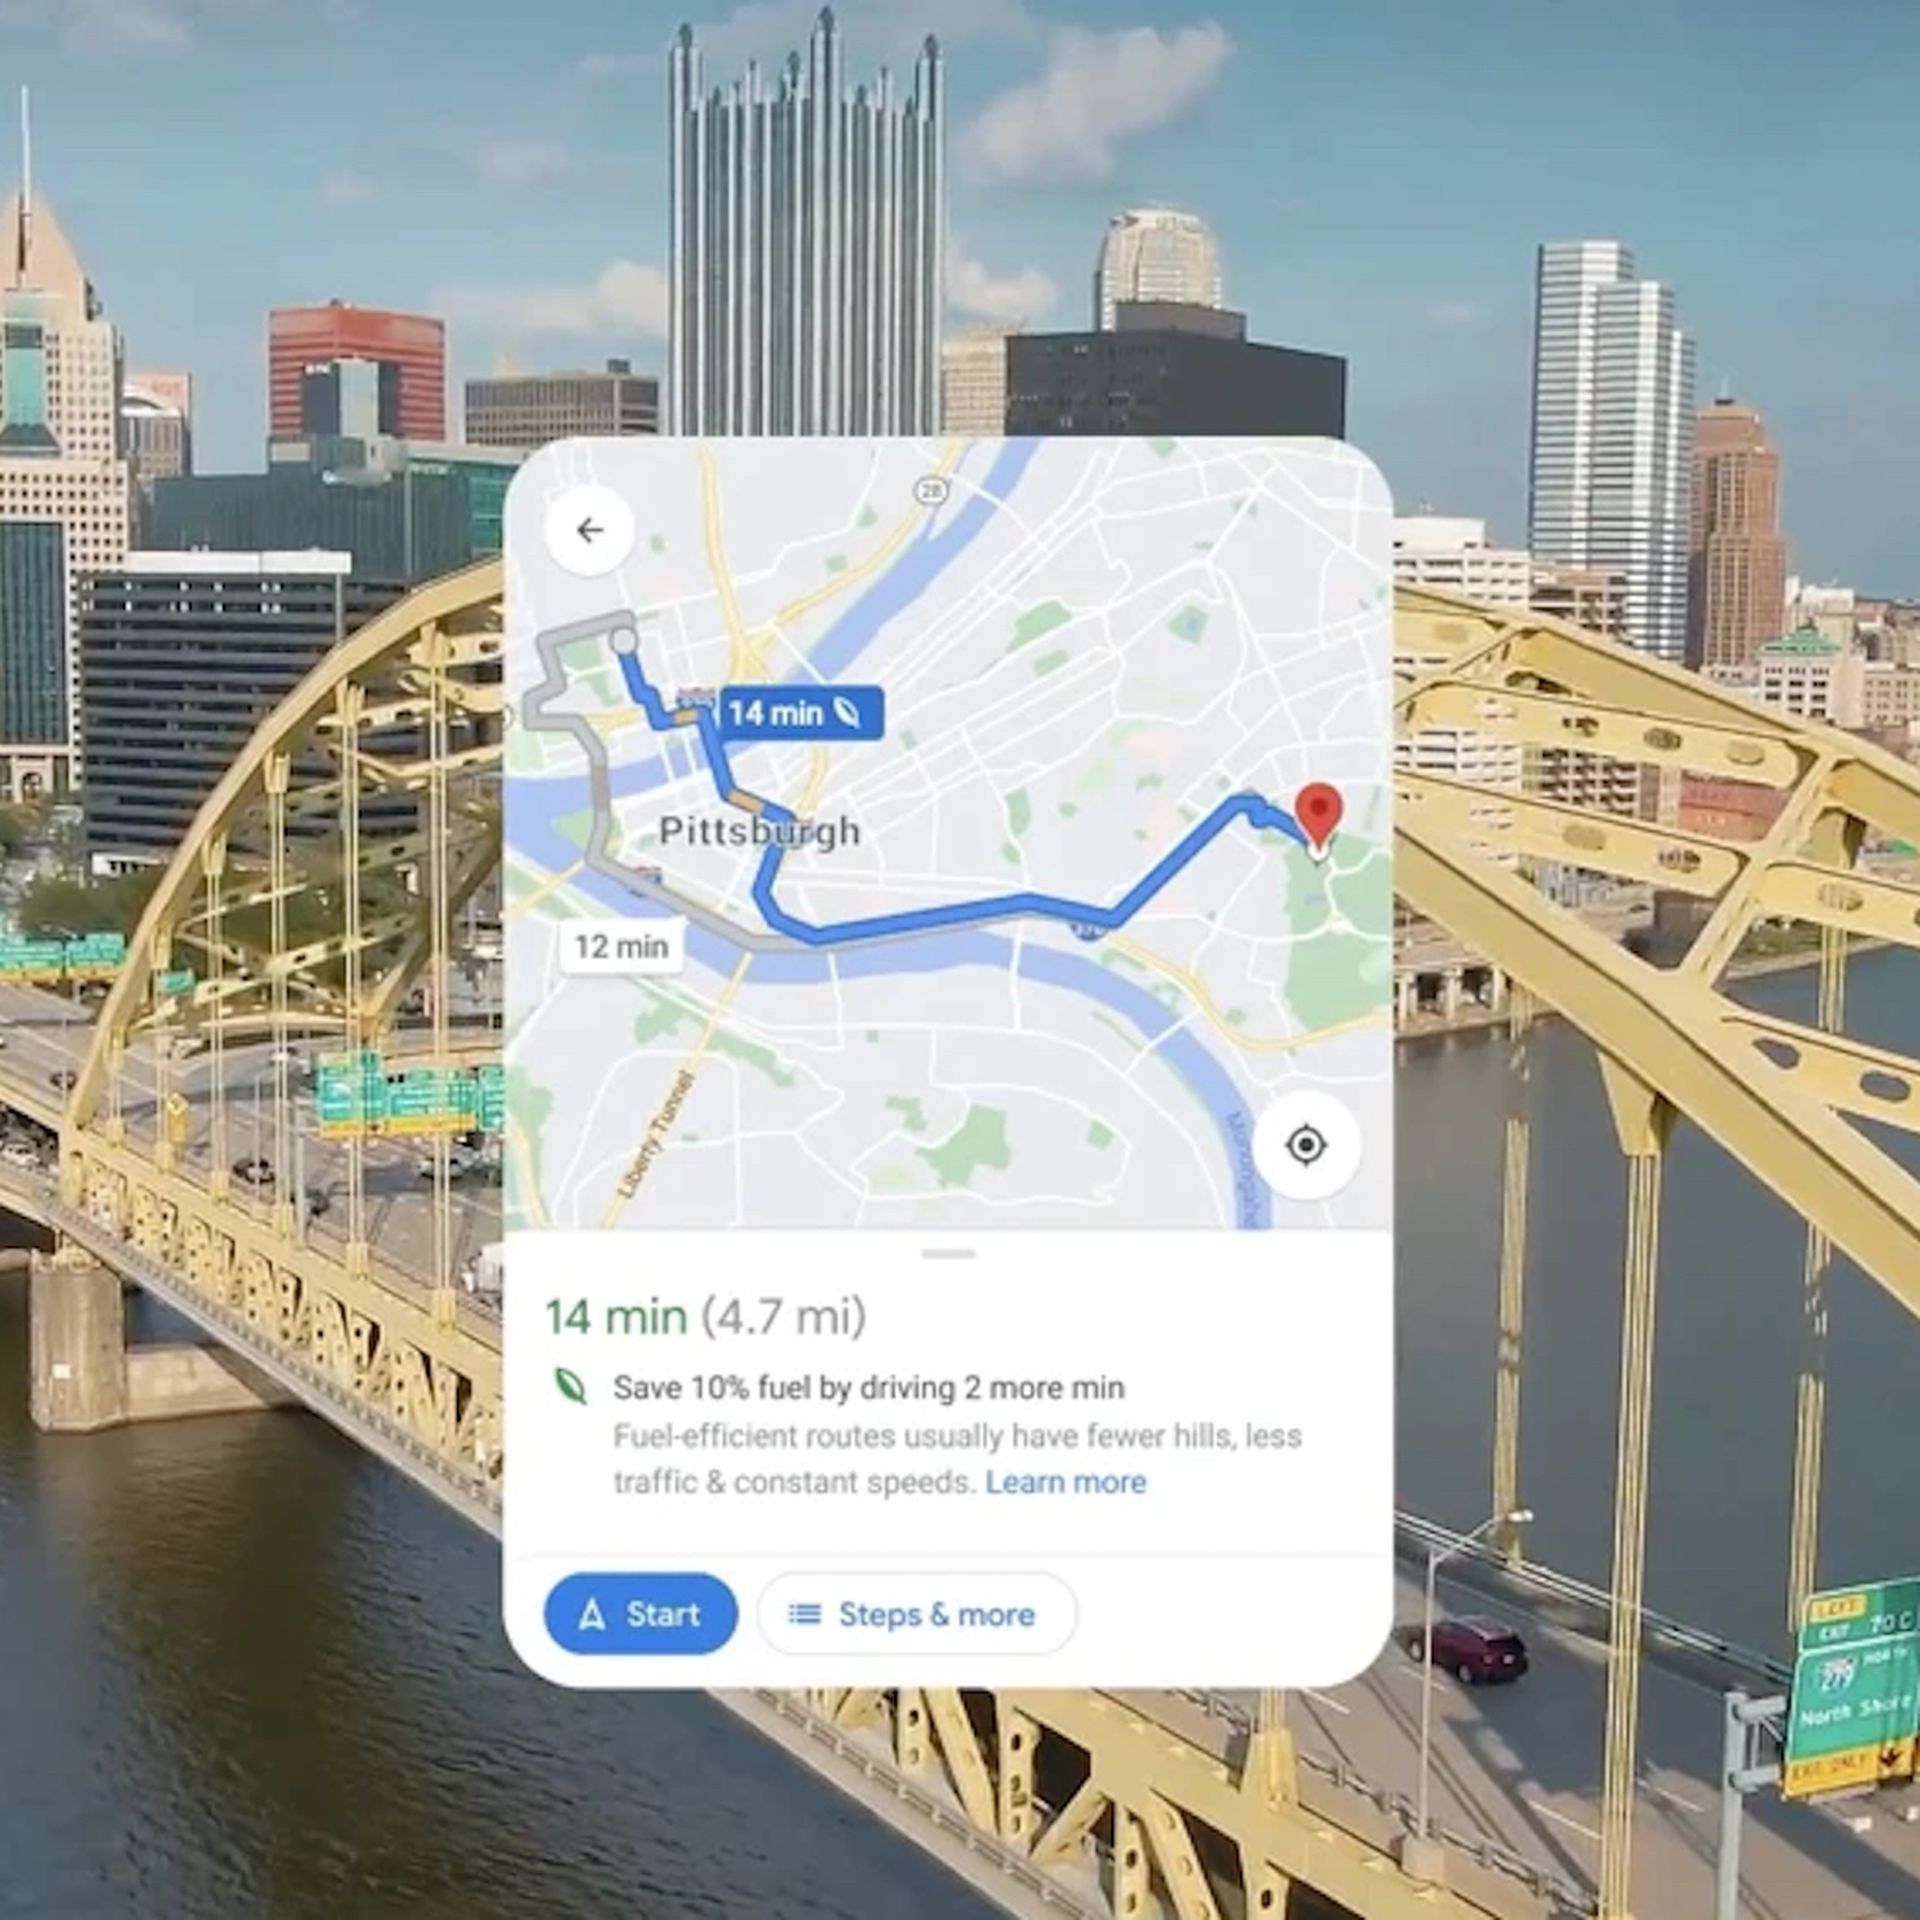 Google Map of Pittsburgh, Pennsylvania, USA - Nations Online Project